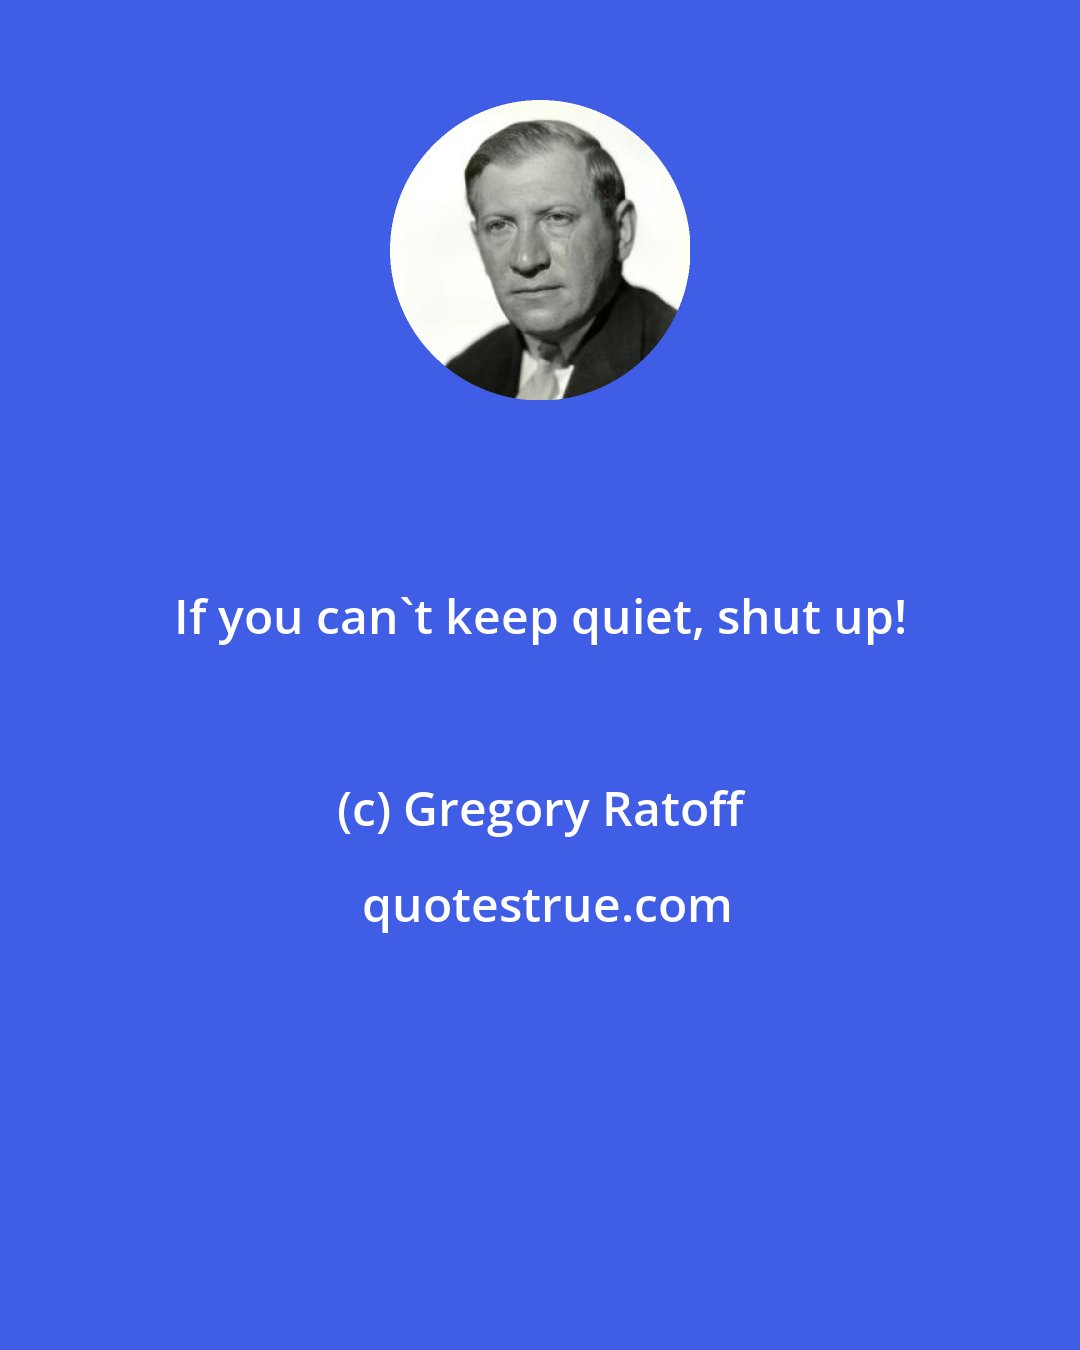 Gregory Ratoff: If you can't keep quiet, shut up!